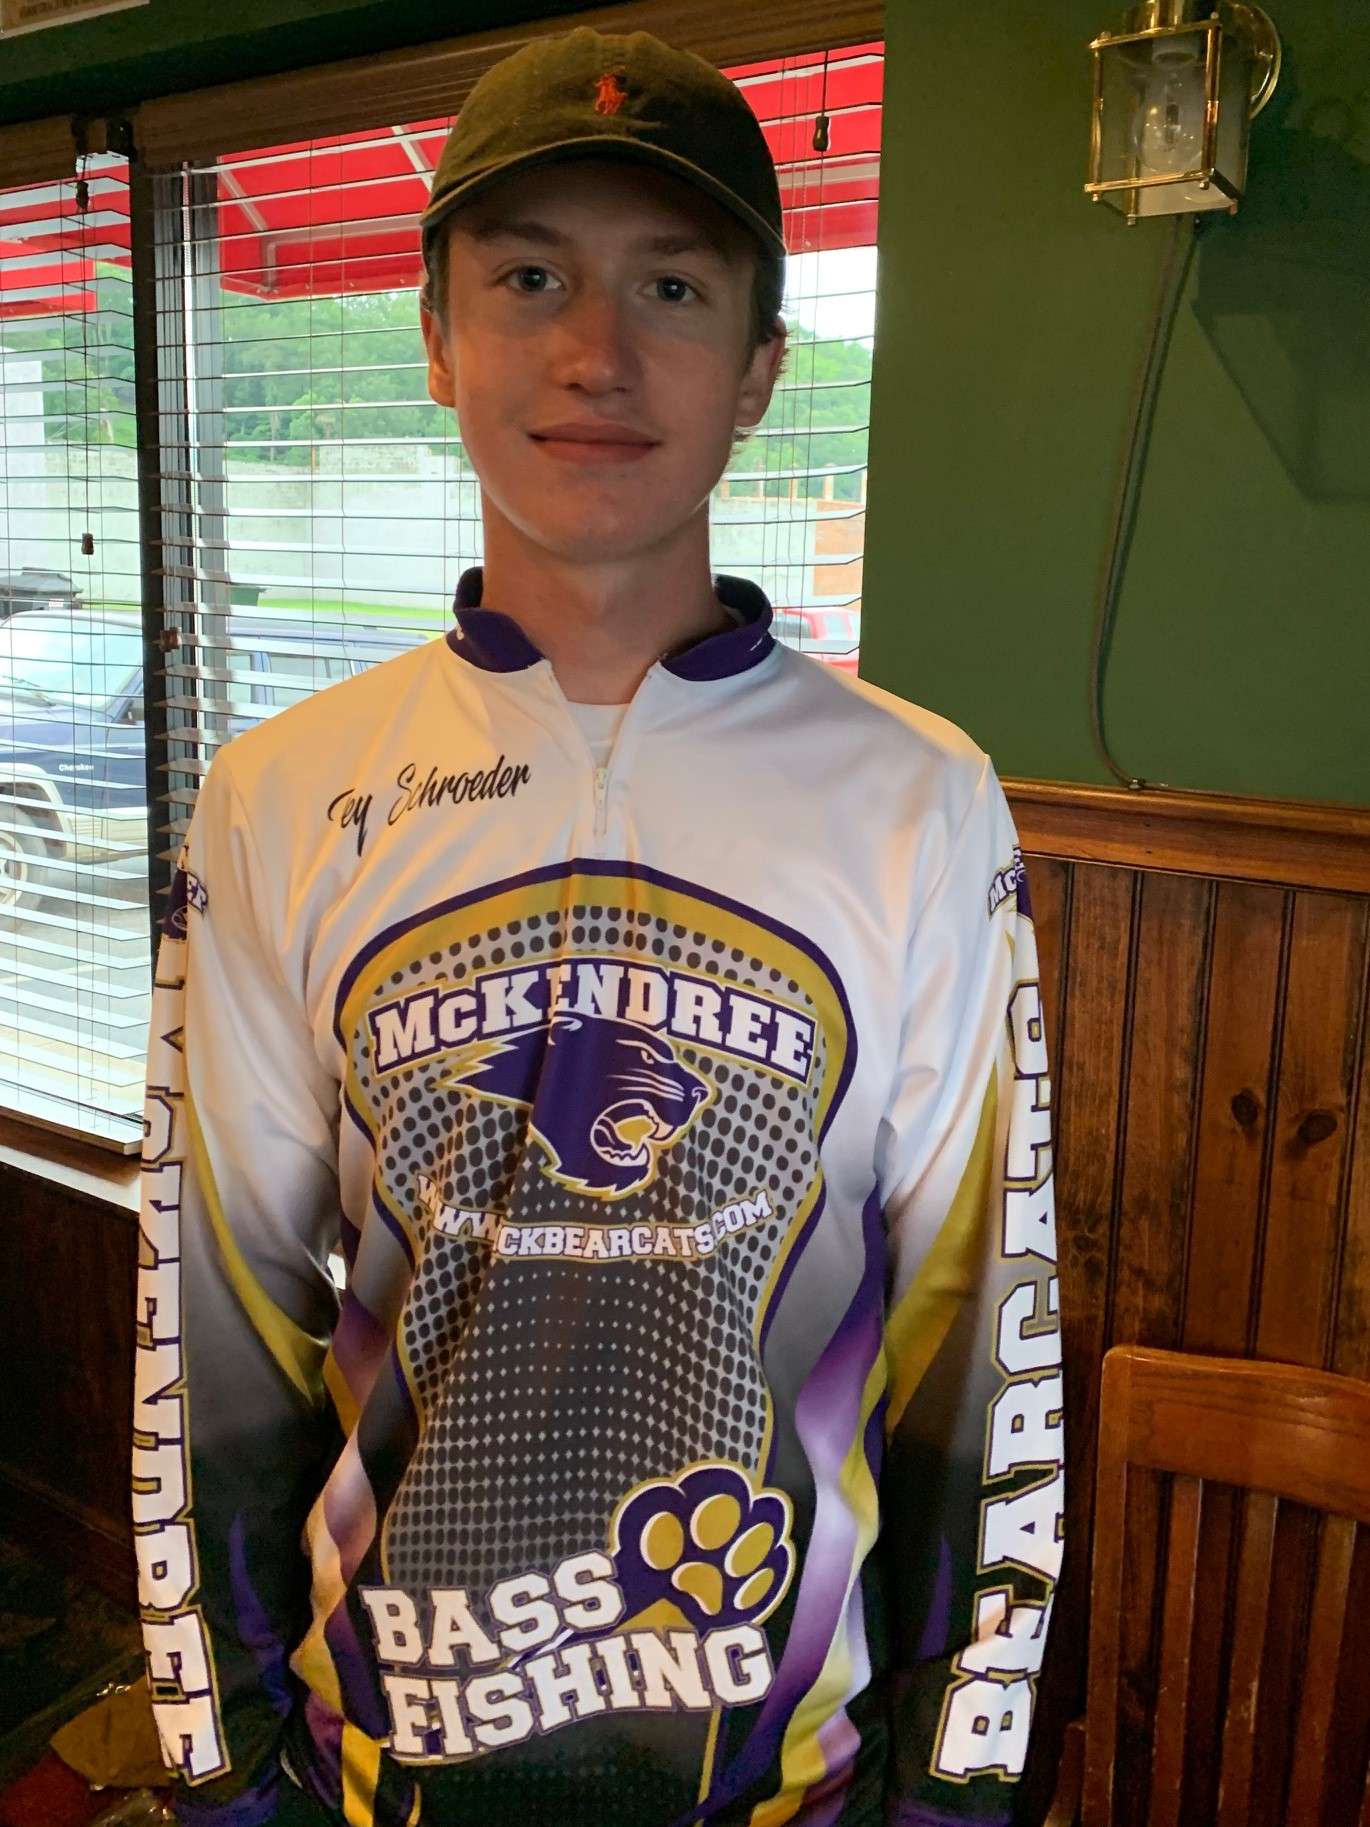 No. 8 seed<BR> Trey Schroeder, McKendree University<BR> Age: 19. Hometown: St. Louis, Mo.<BR> Sophomore, environmental studies.<BR> Favorite technique: Flipping and pitching.<BR> Thoughts on Watts Bar: âI have never been to Watts Bar, but Iâm looking forward to it.â<BR> Weight to advance: âItâll take 18 pounds to win Round 1.â<BR> What would it mean to advance and fish the Bassmaster Classic? âWinning the College Classic Bracket would be amazing. It would mean everything to me. Itâs been my lifelong dream to fish the Classic.â<BR> 